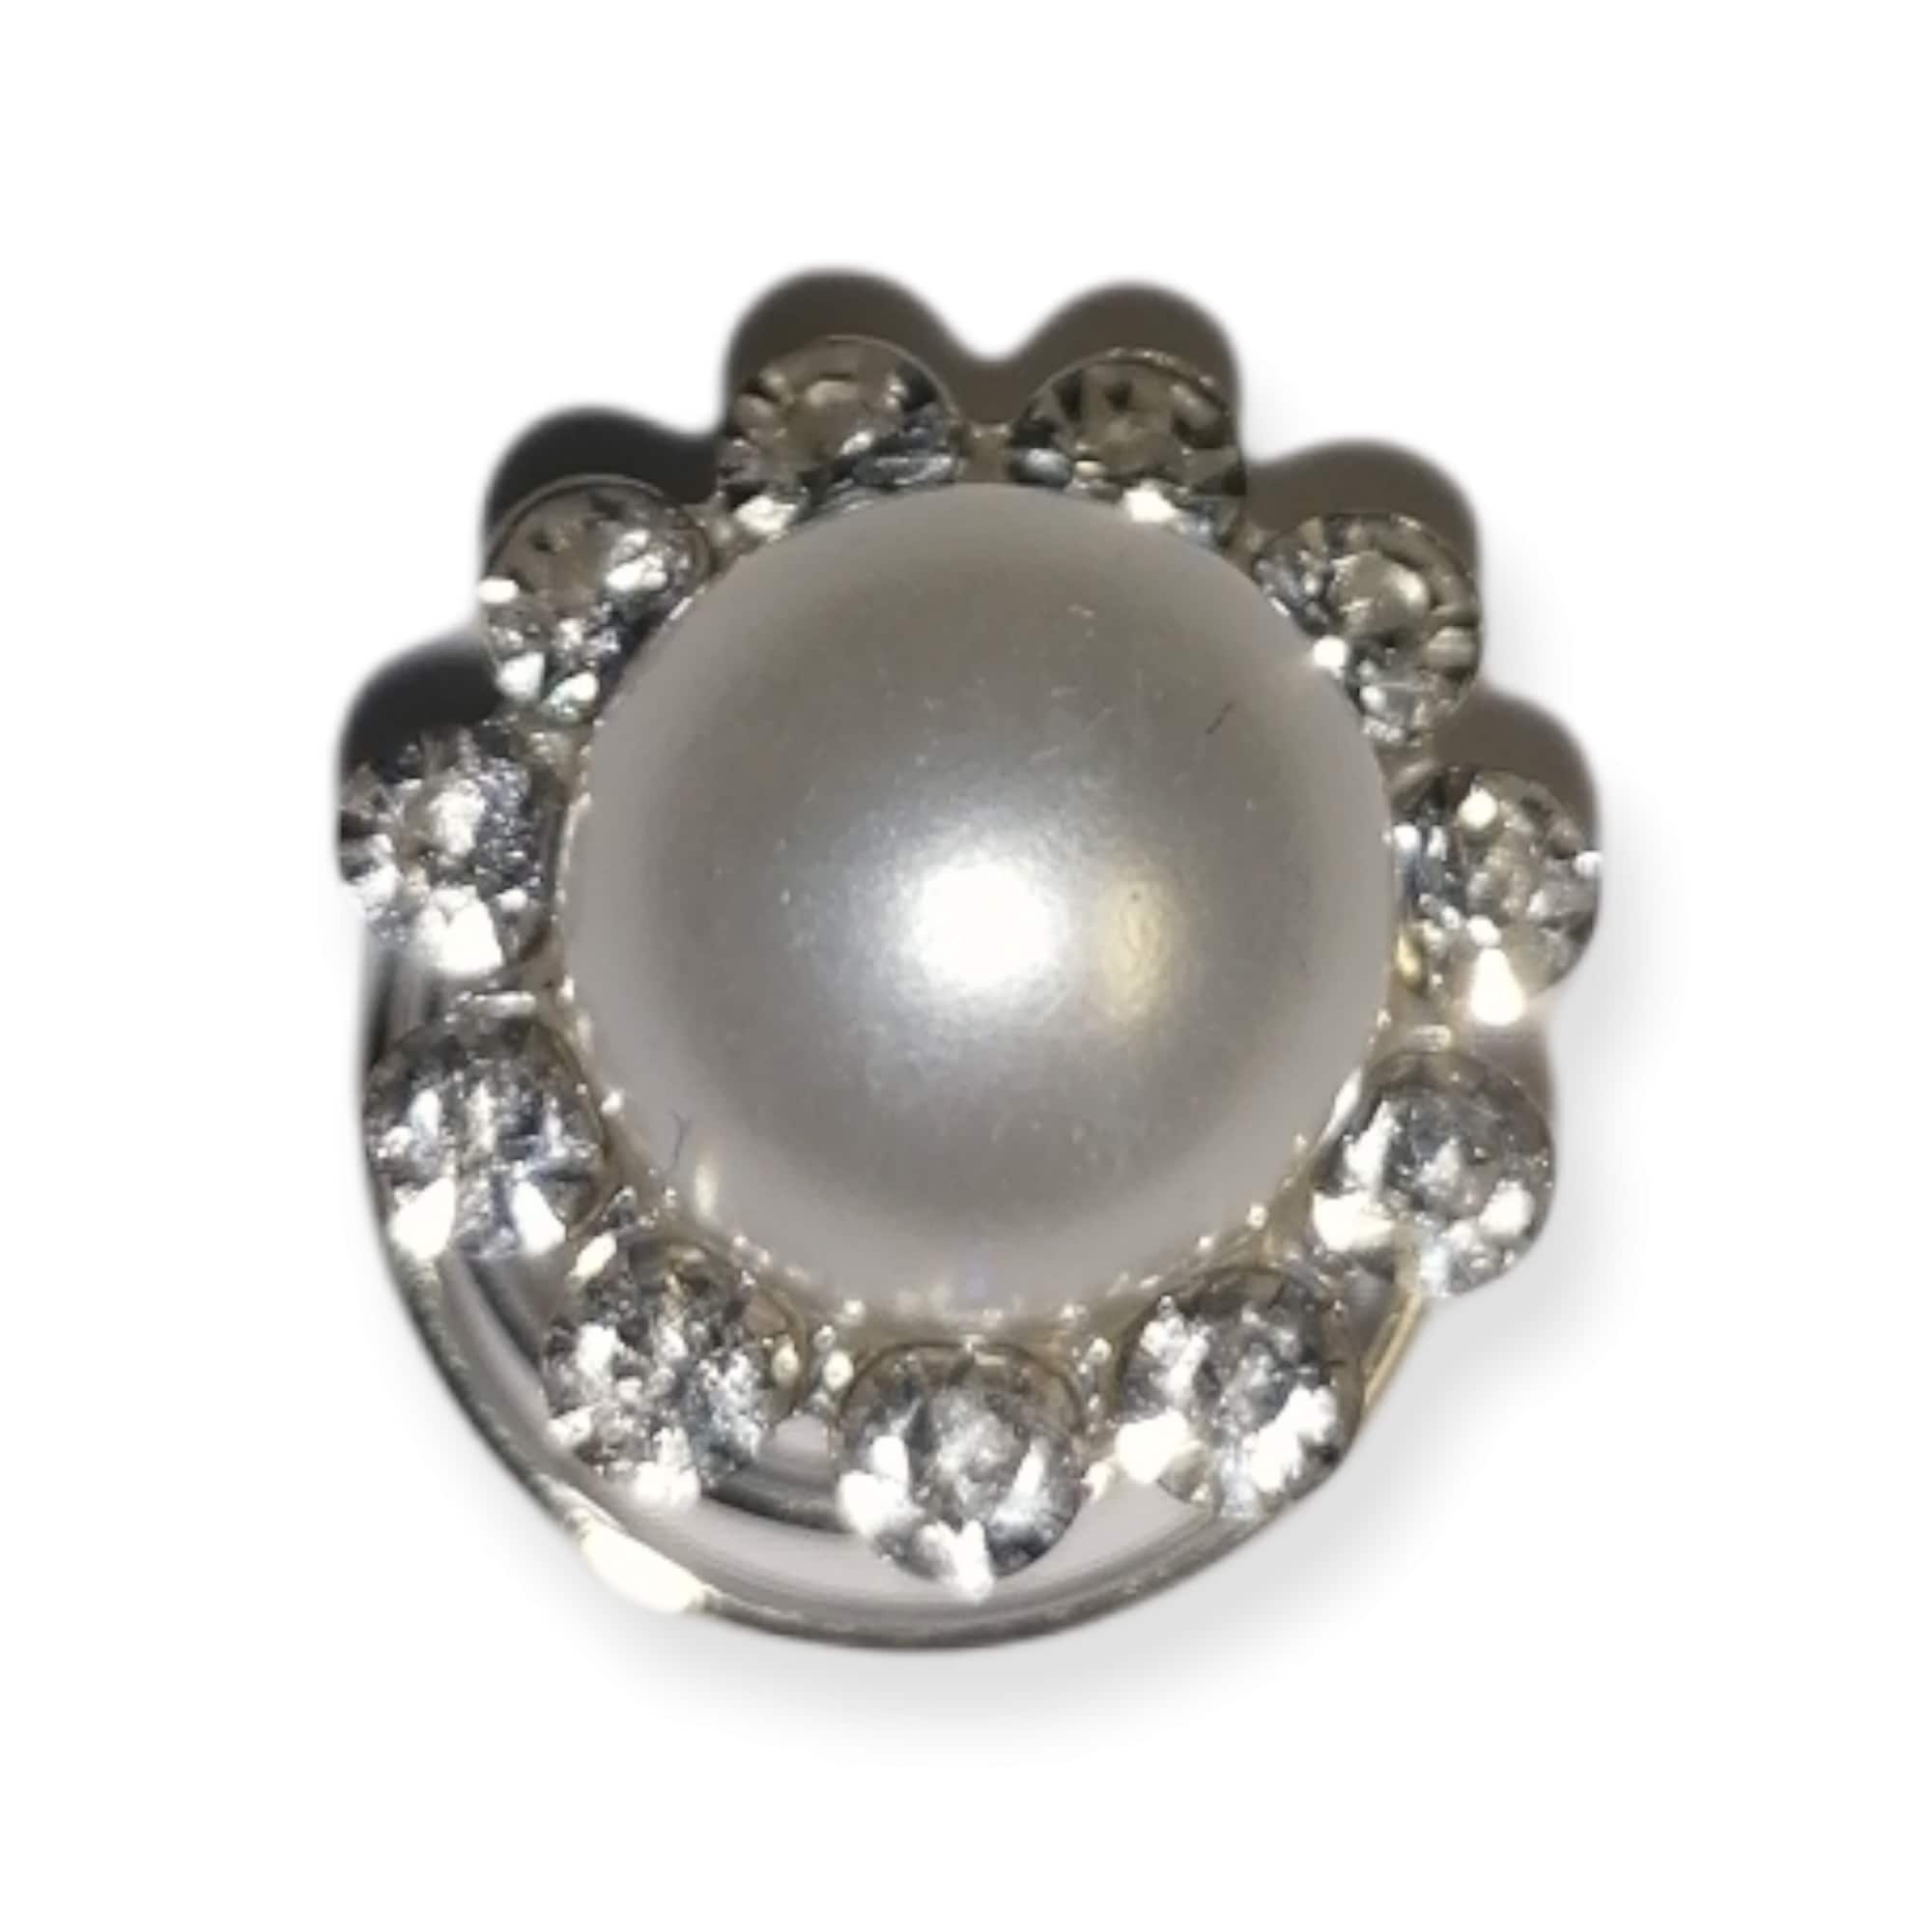 Hair Spiral Pearl With Diamonds